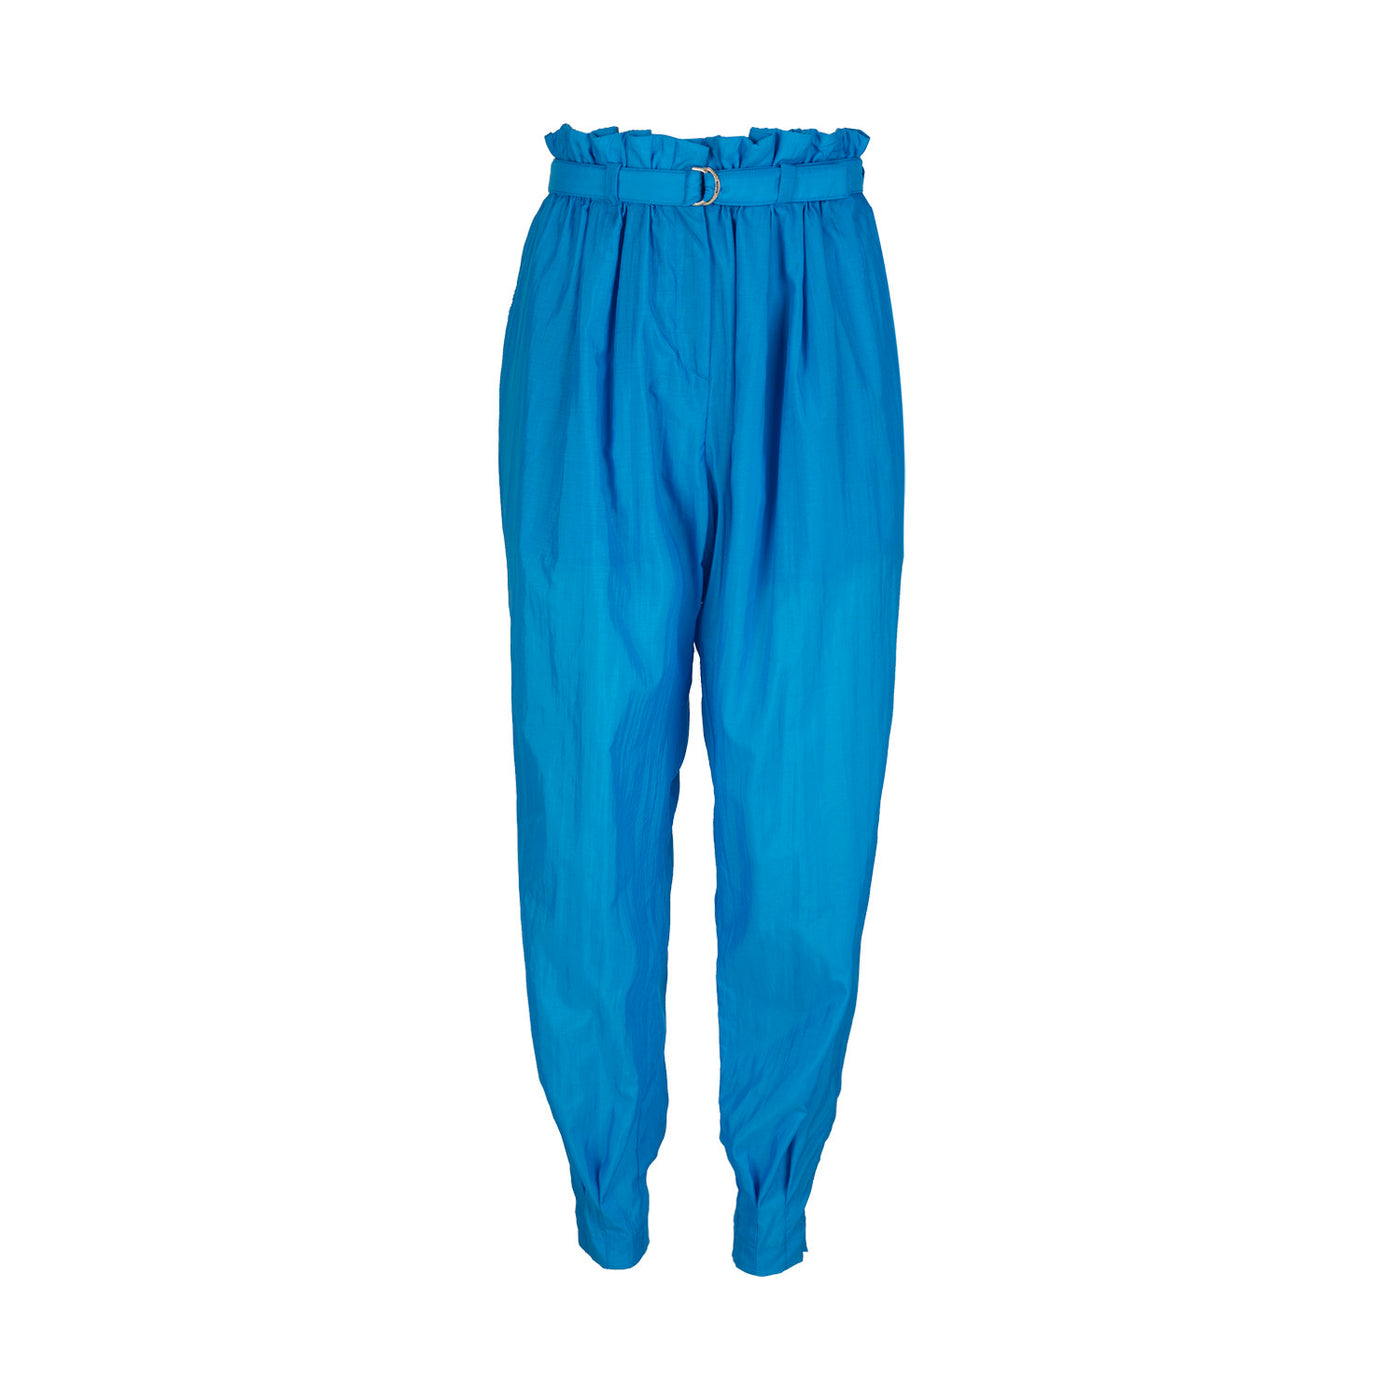 Blue Cargo Pants with Frill and Pleats with Belt